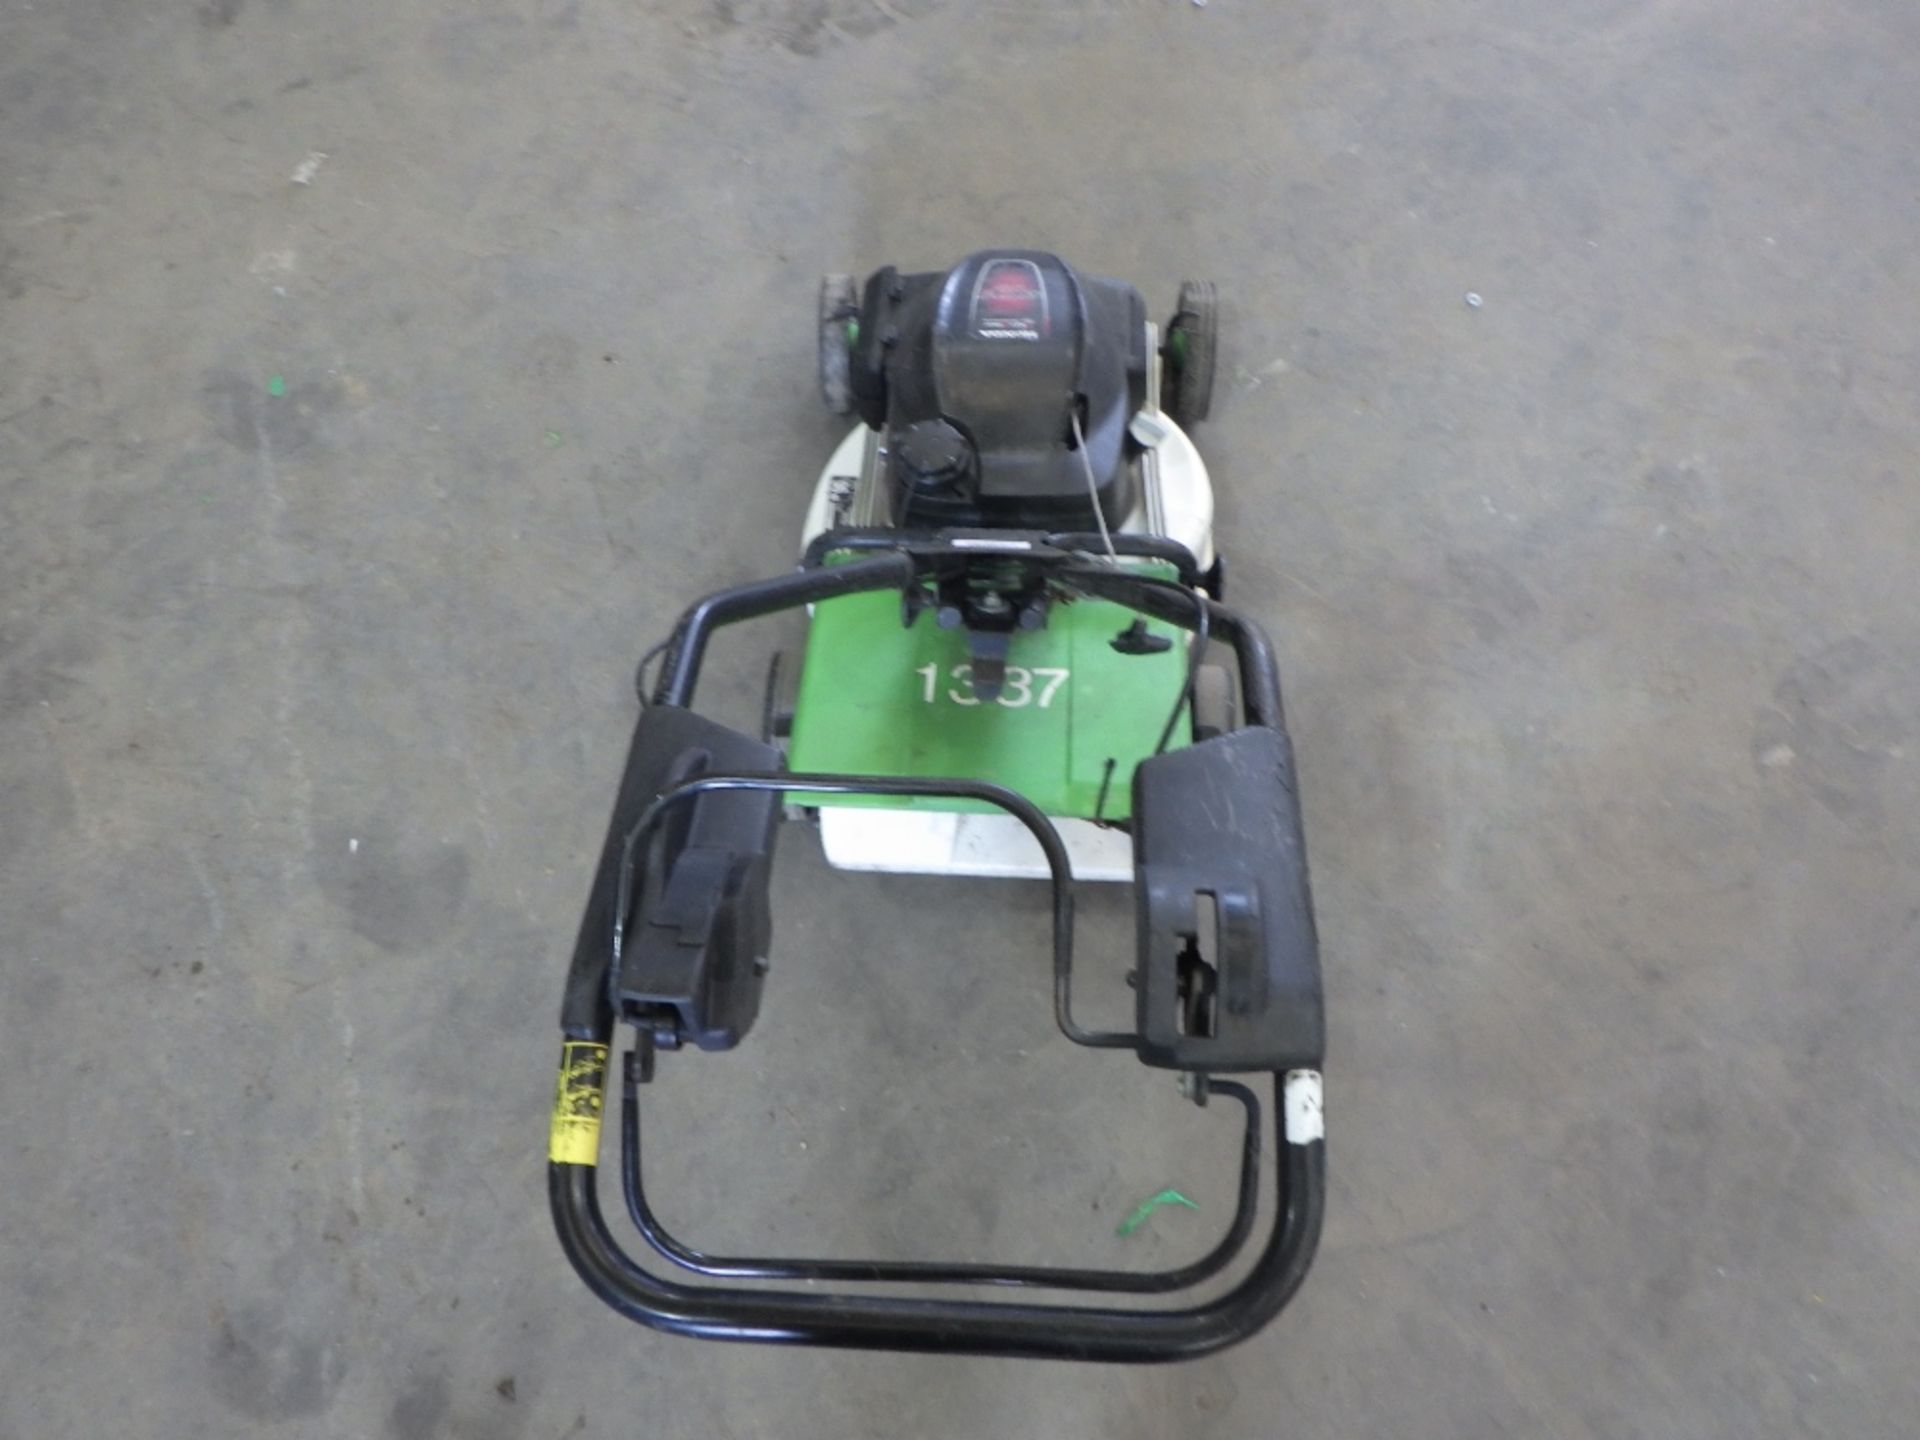 ETESIA PHTS3 LAWN MOWER - Image 3 of 4